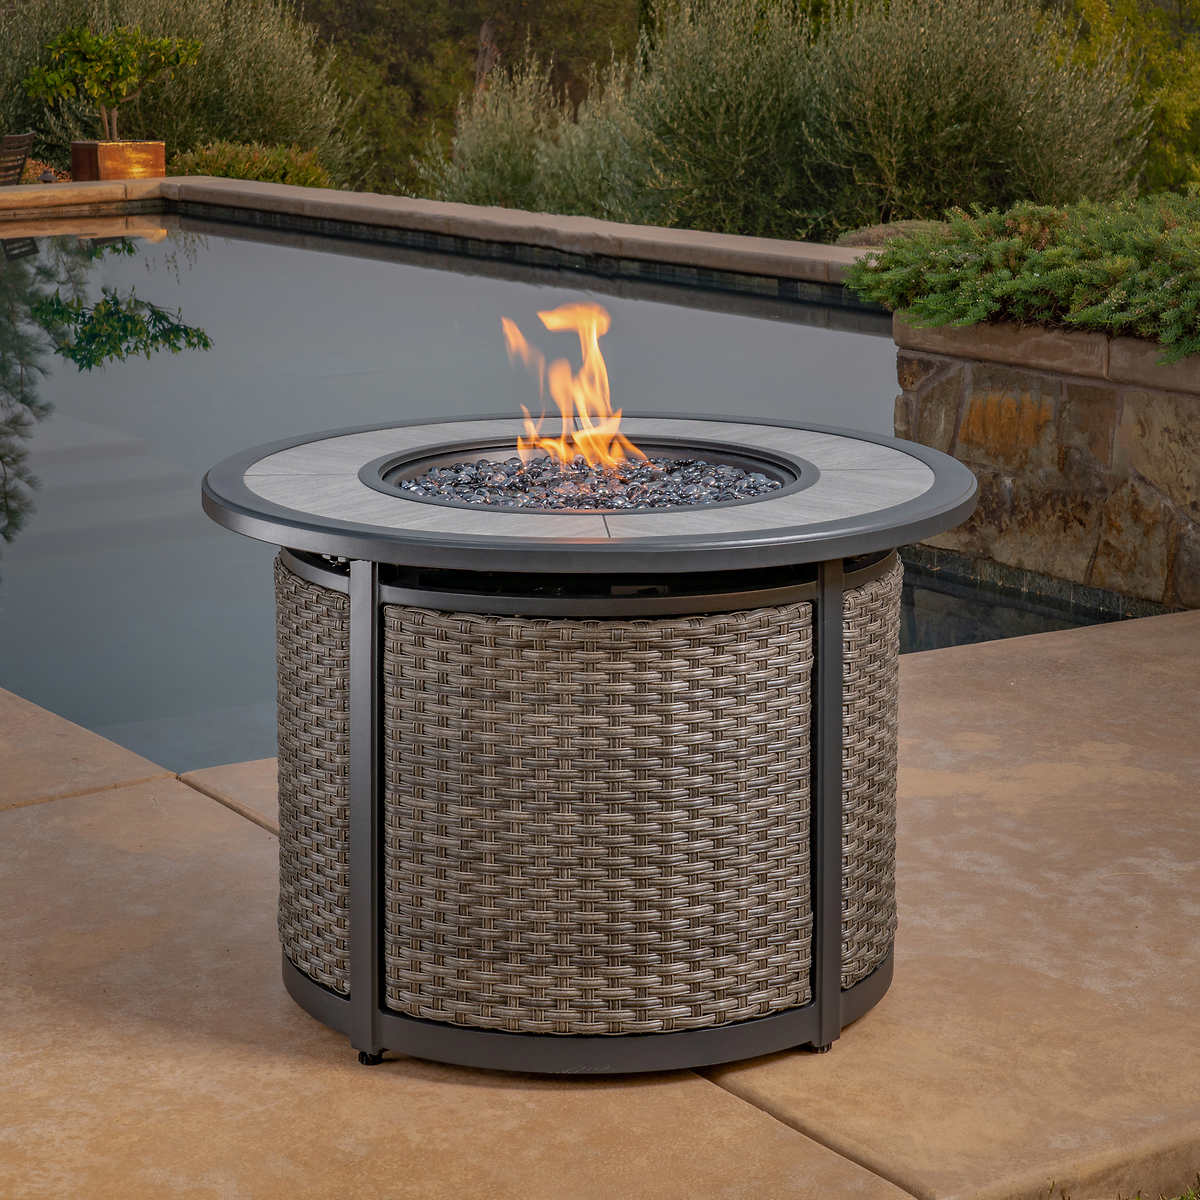 Madison Fire Pit Table Costco, Fire Pit Pics